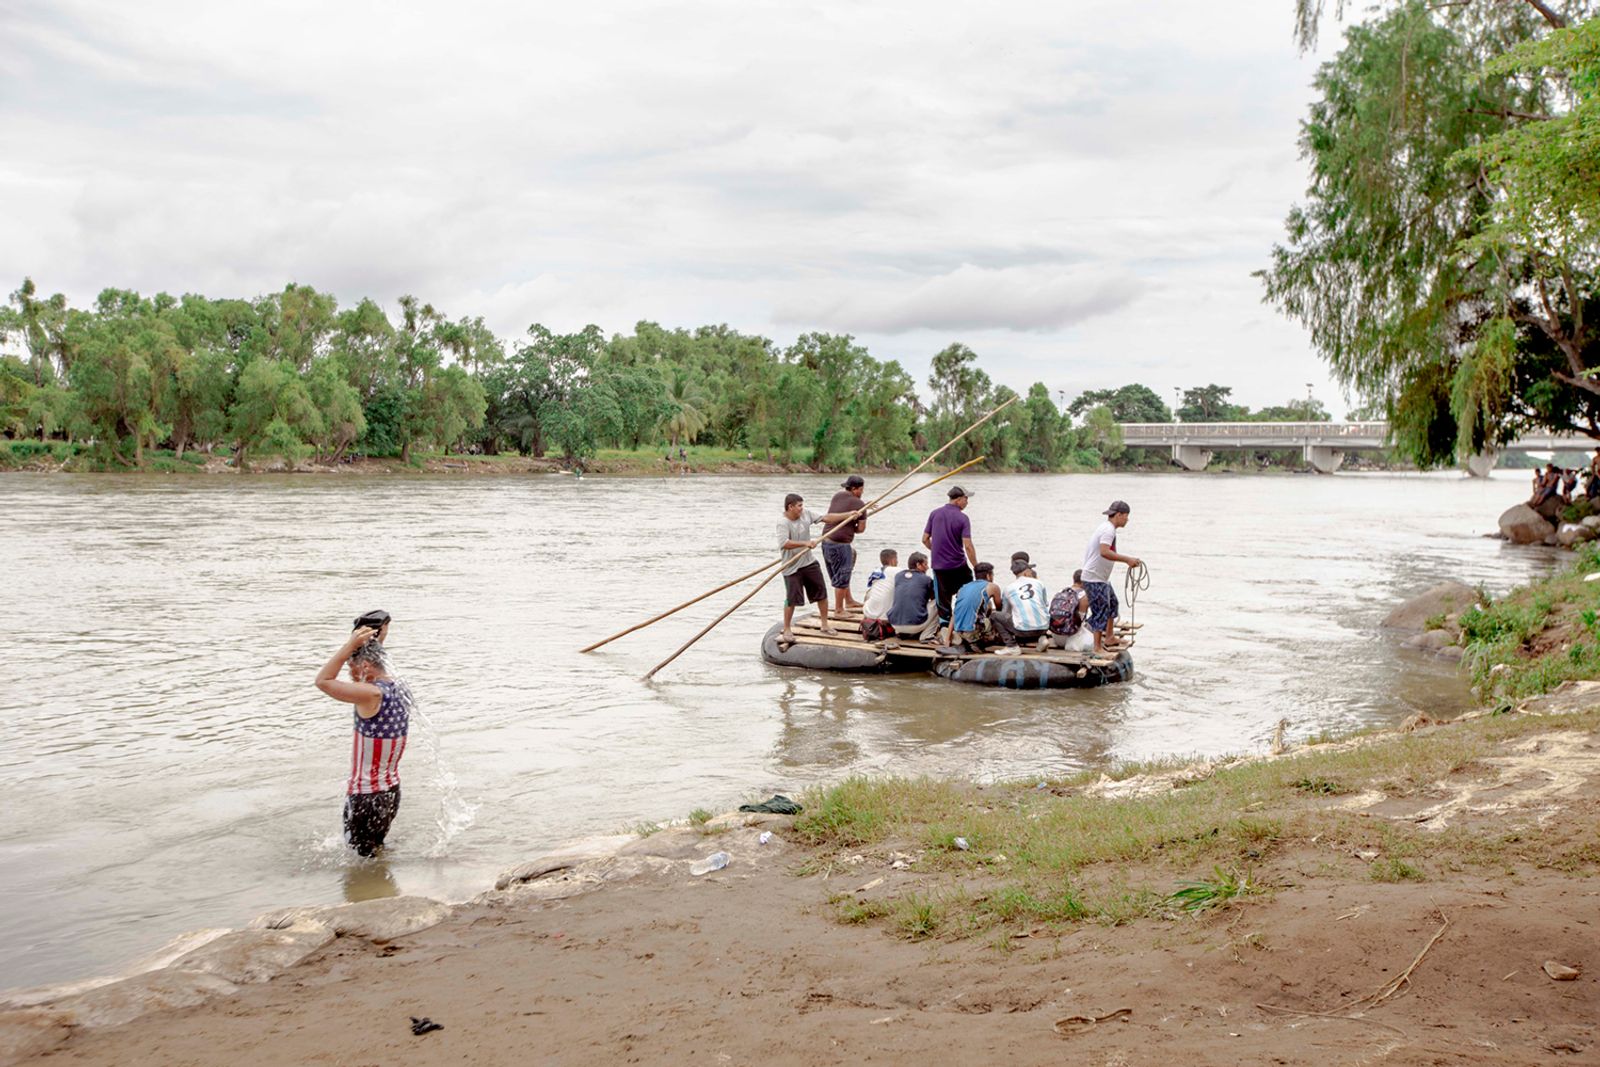 © Fred Ramos - Central American migrants cross the Suchiate River between Guatemala and Mexico, October 2018. Fred Ramos